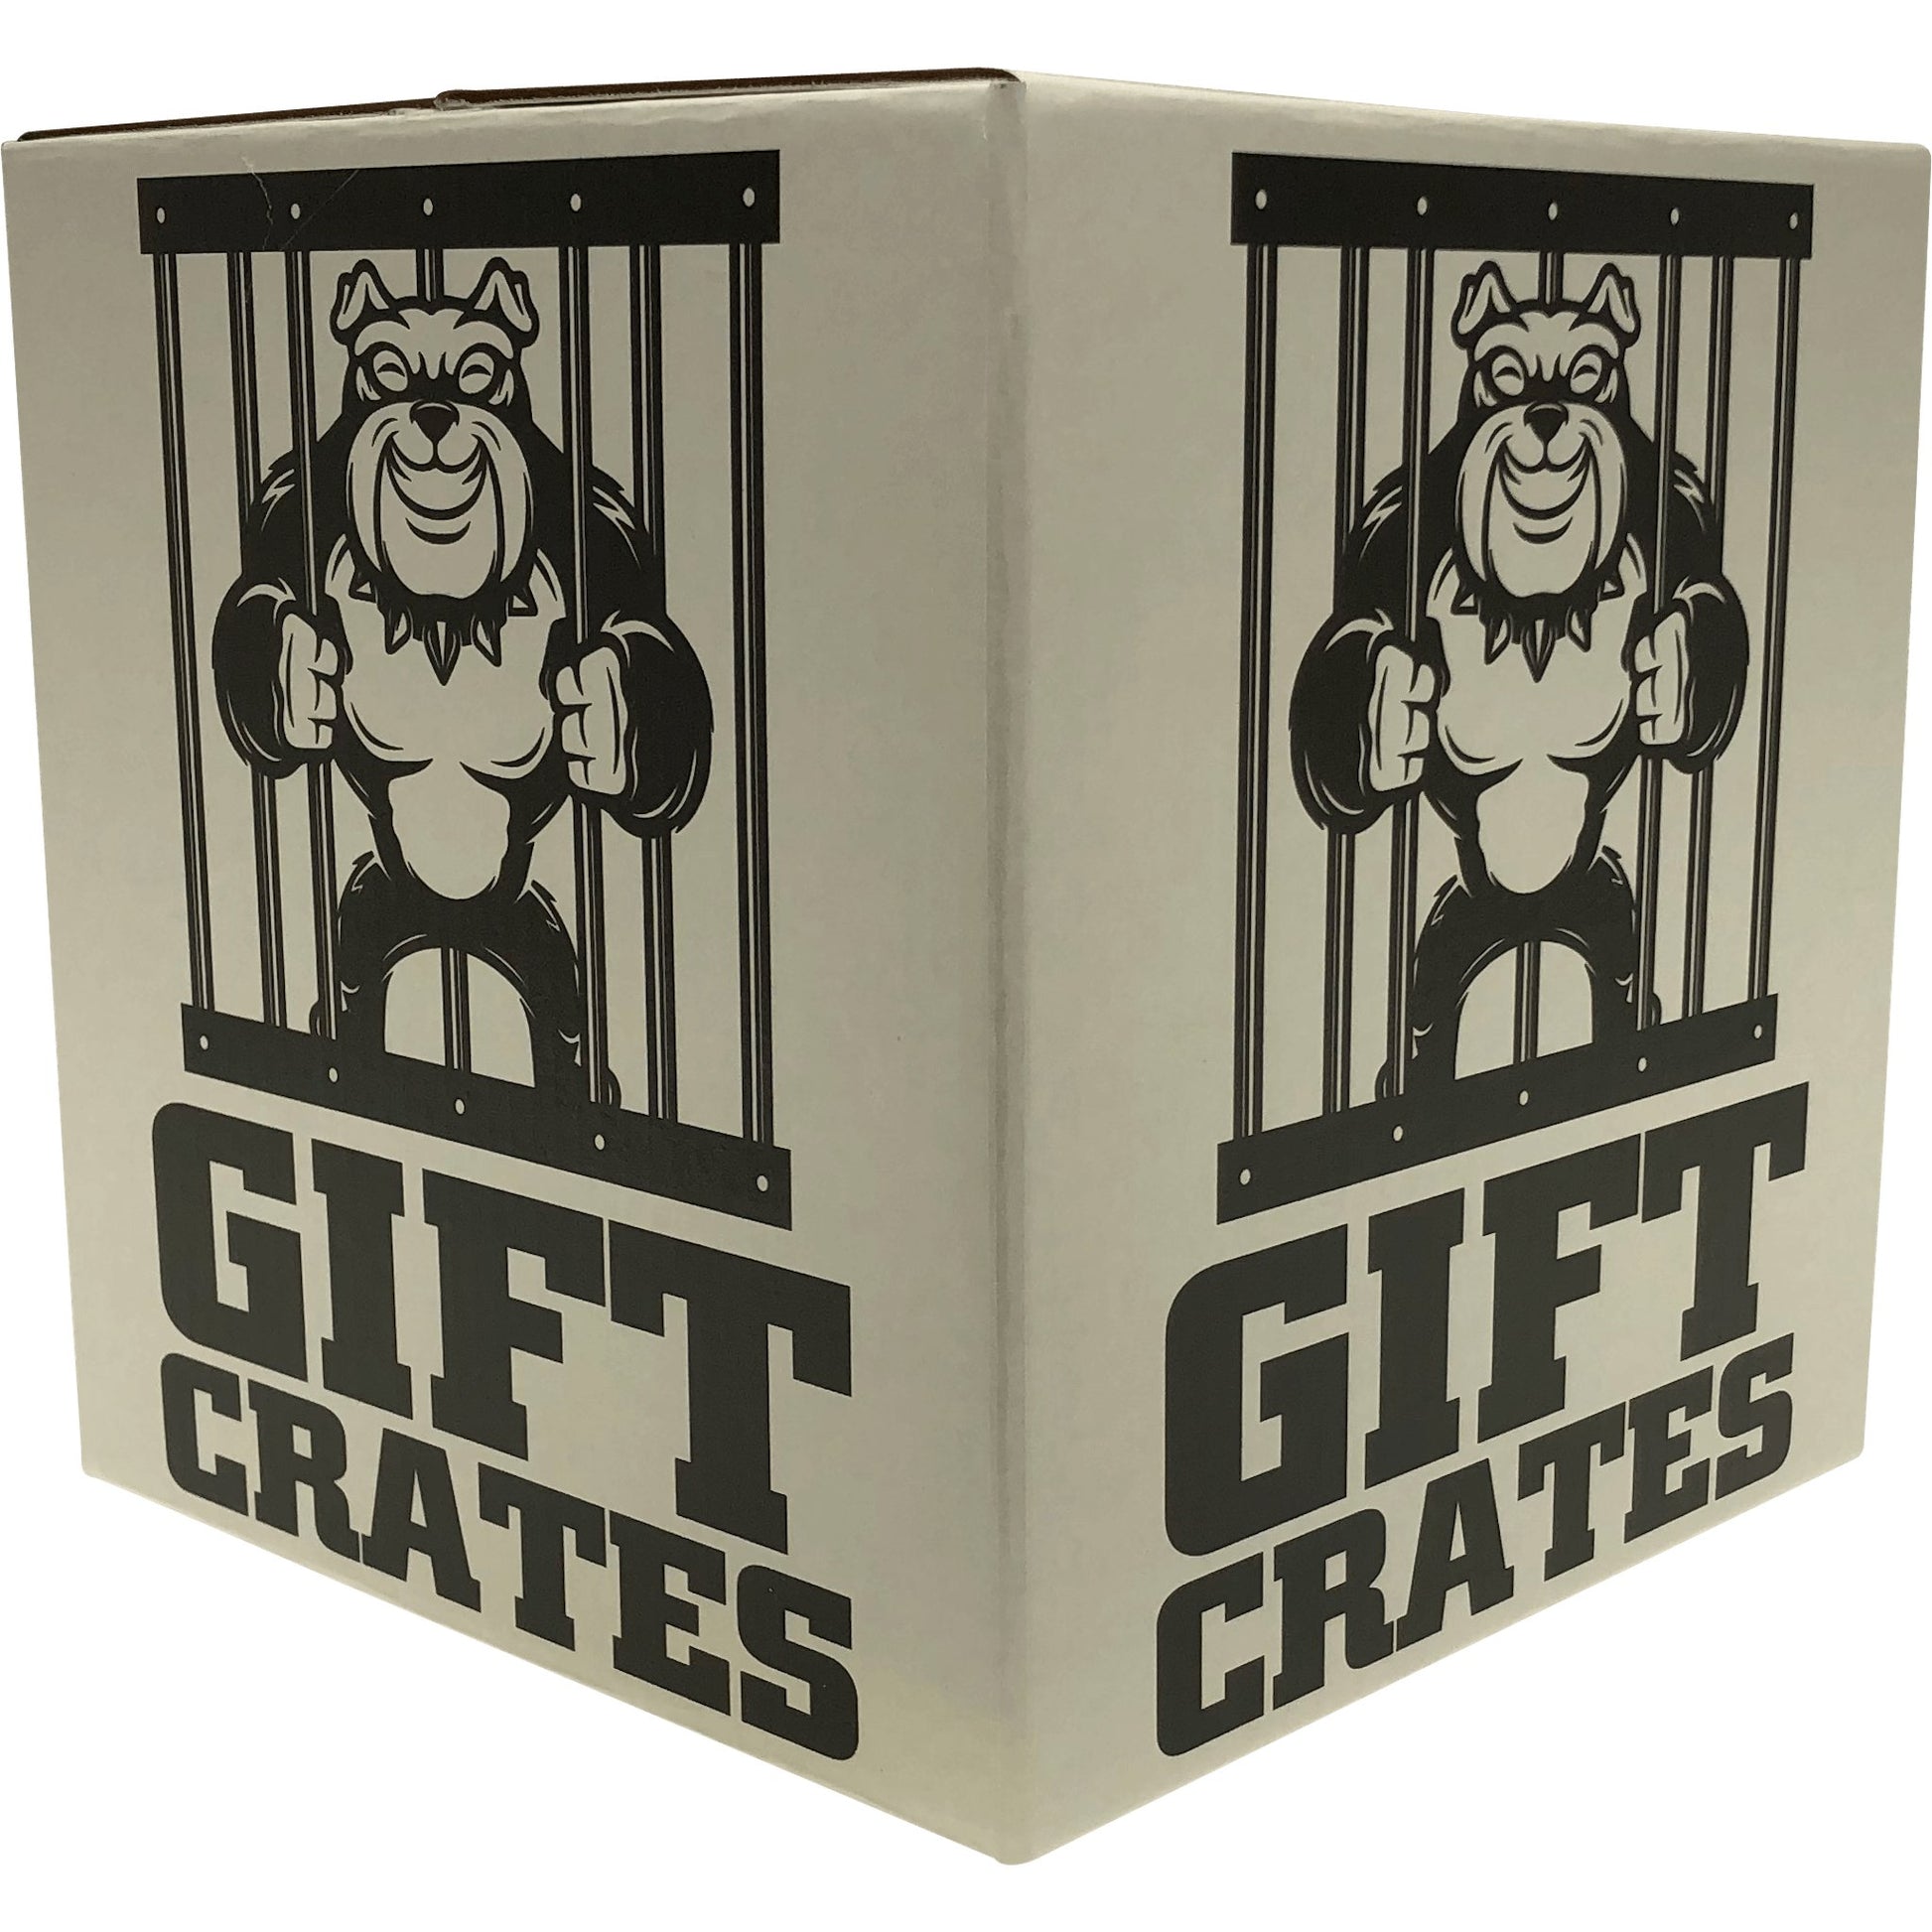 Bloody Mary Crate - Gift Crates